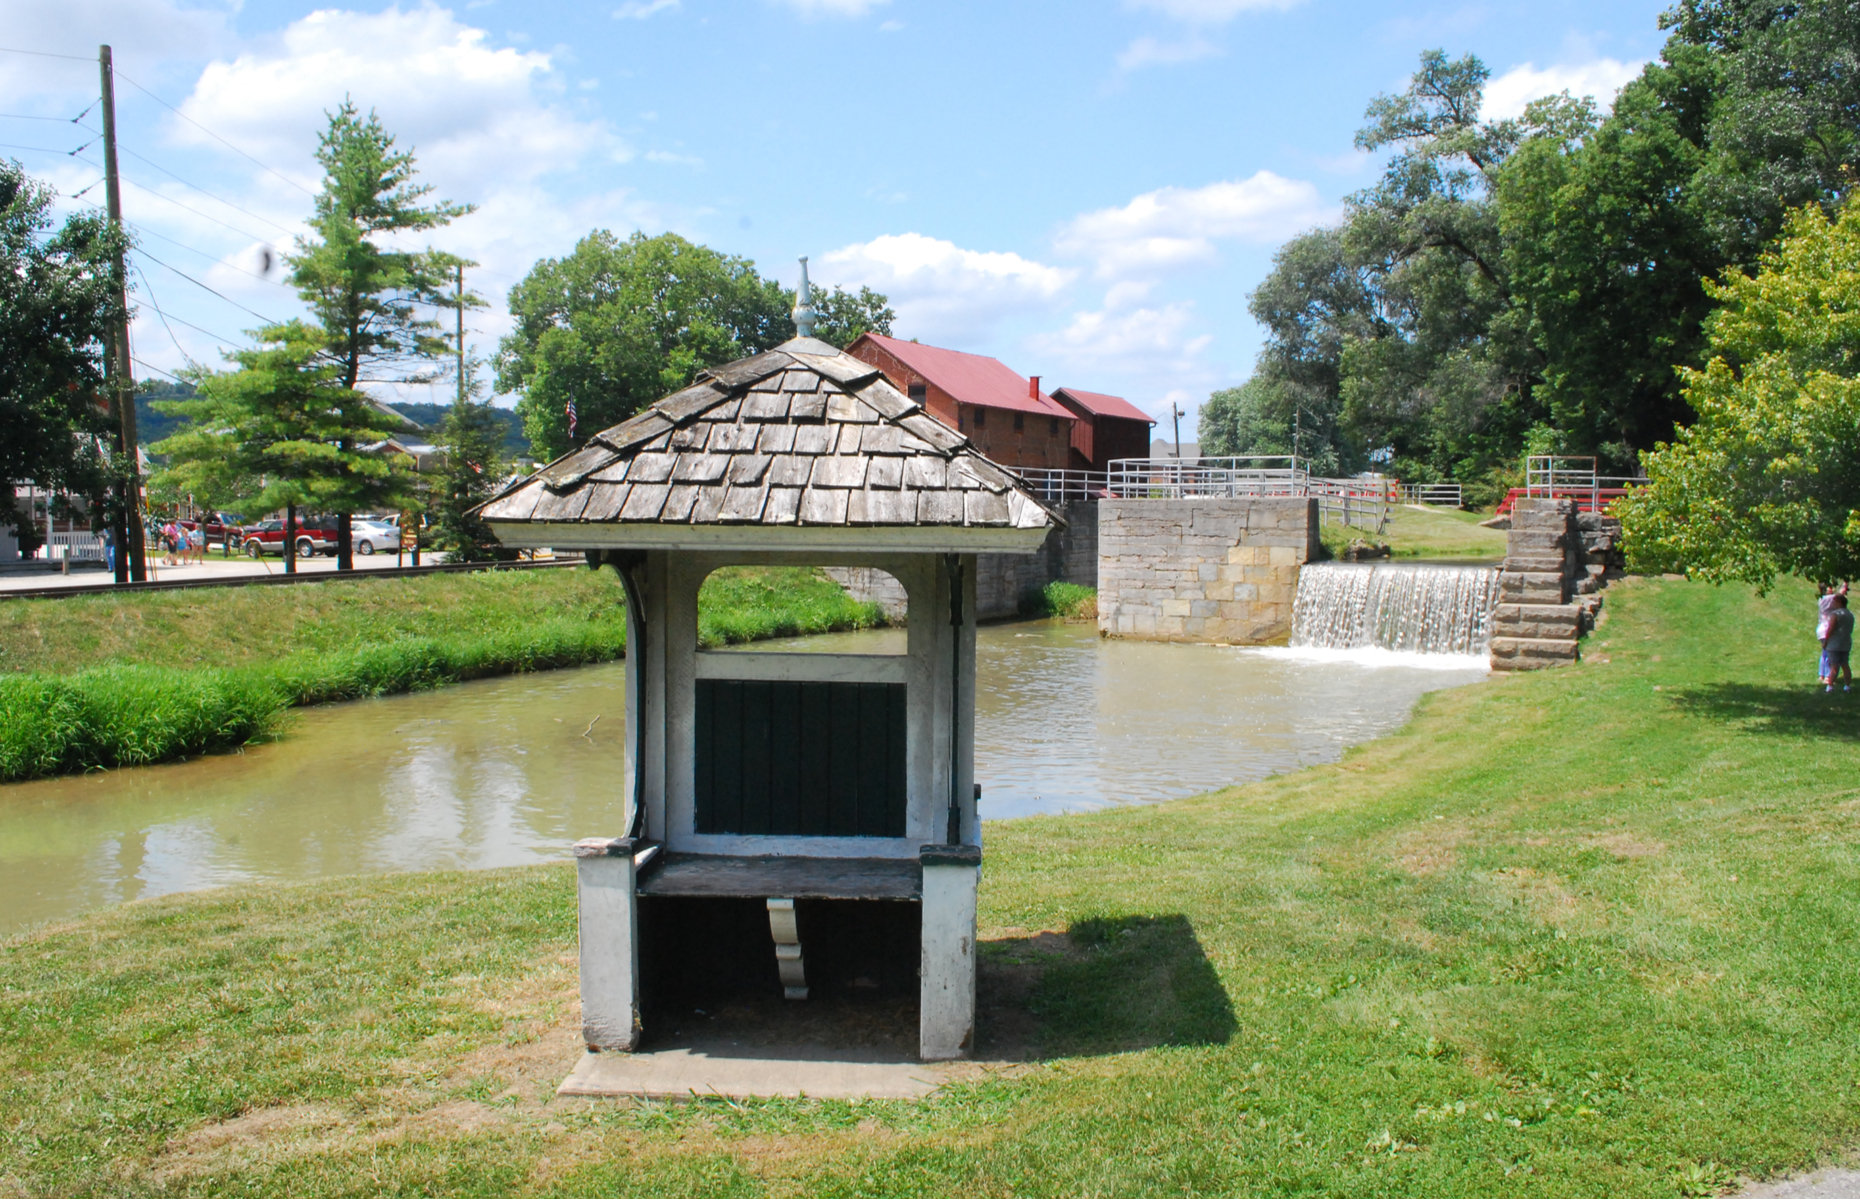 <p class="p1"><span>With a population of less than 200 people, <a href="https://www.metamoraindiana.com/index.php" rel="noreferrer noopener"><span>Metamora</span></a> is a secret to even some locals. This historic canal town, which dates back to 1838 and has a total area of just 0.3 square miles, is particularly beautiful during Christmastime, when the quaint shops and houses are covered in lights.</span></p>